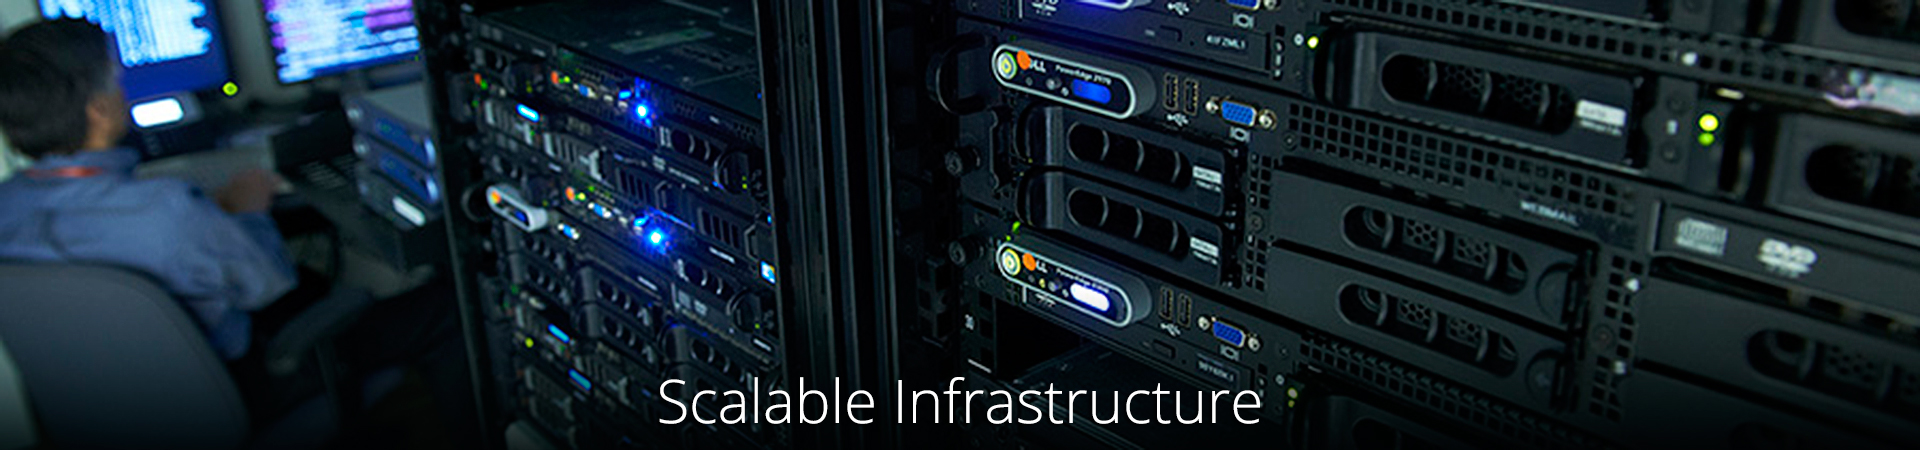 Scalable Infrastructure